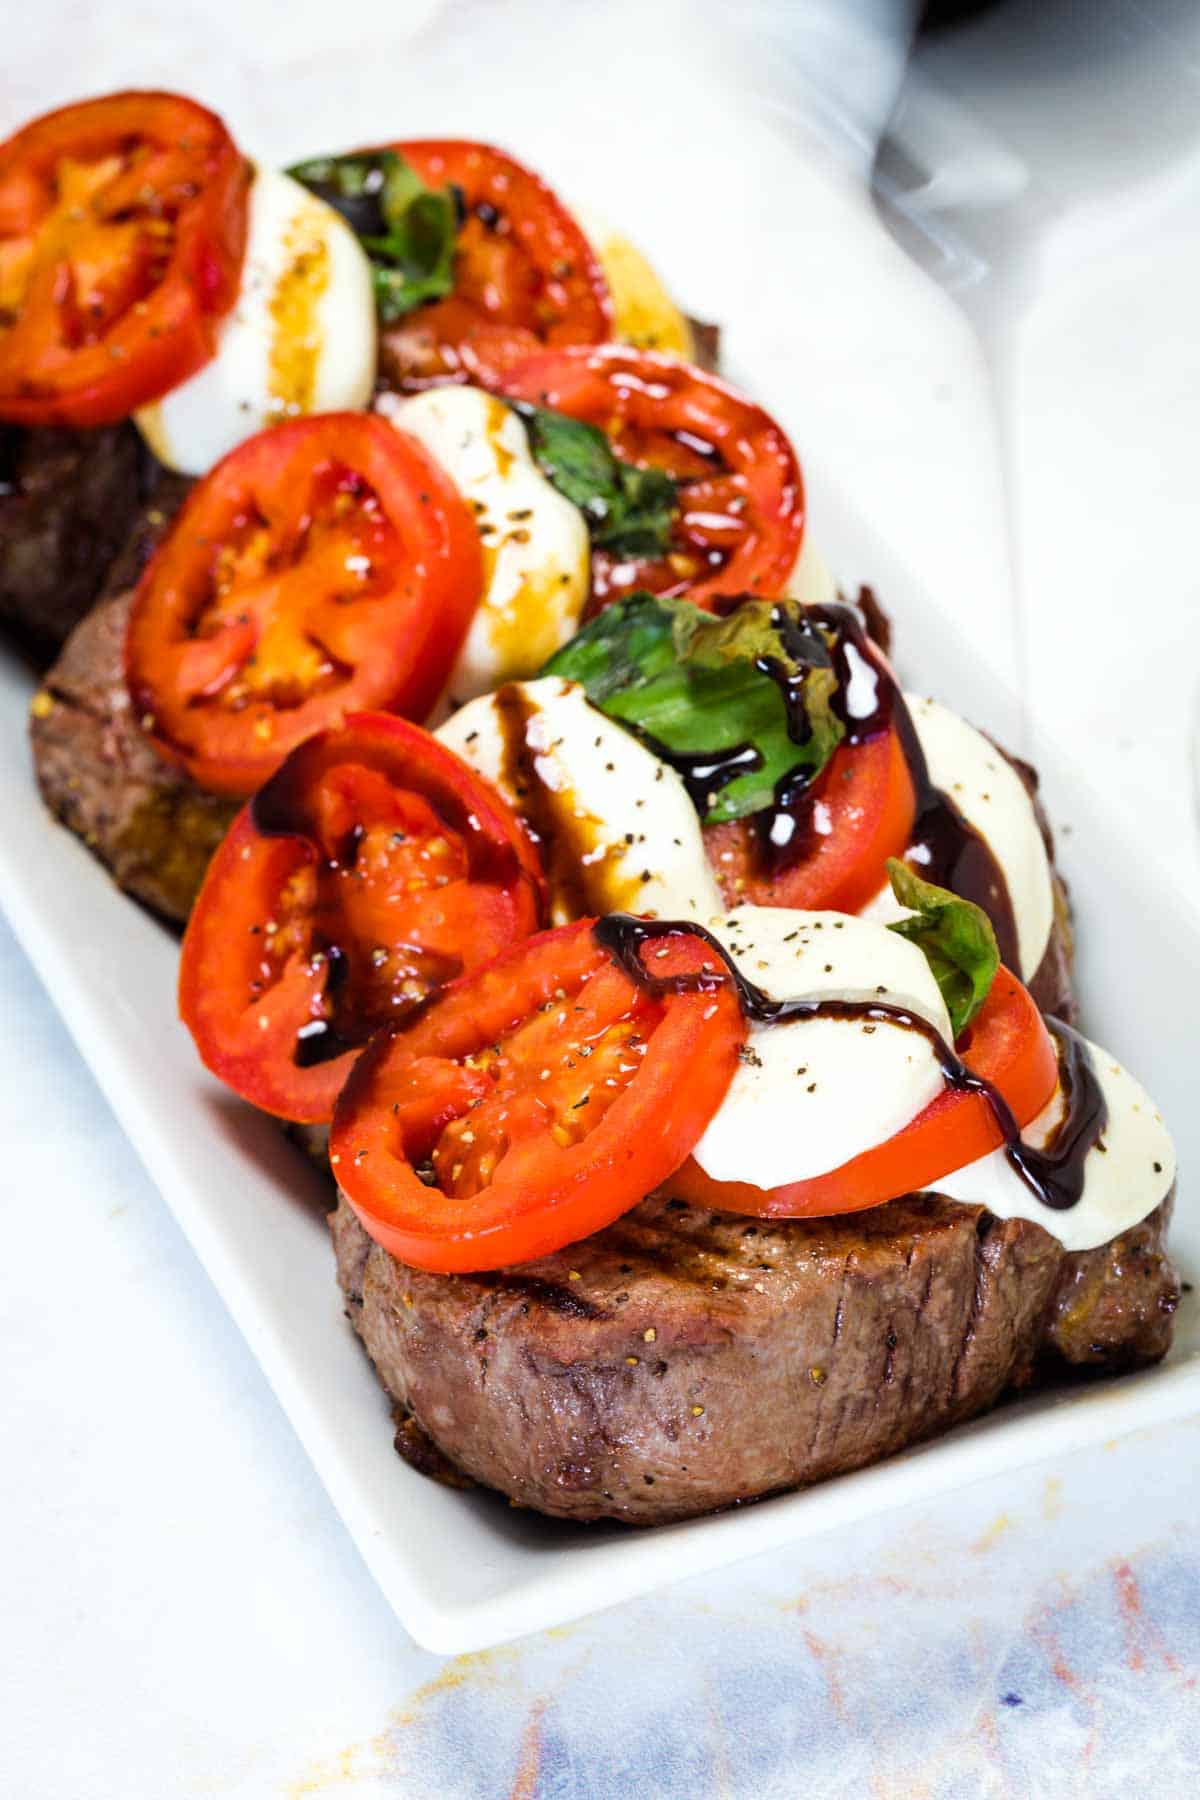 A white tray holds four colorful Caprese steaks topped with slices of fresh mozzarella, bright red tomatoes, fresh basil leaves, and a drizzle of balsamic vinegar reduction.